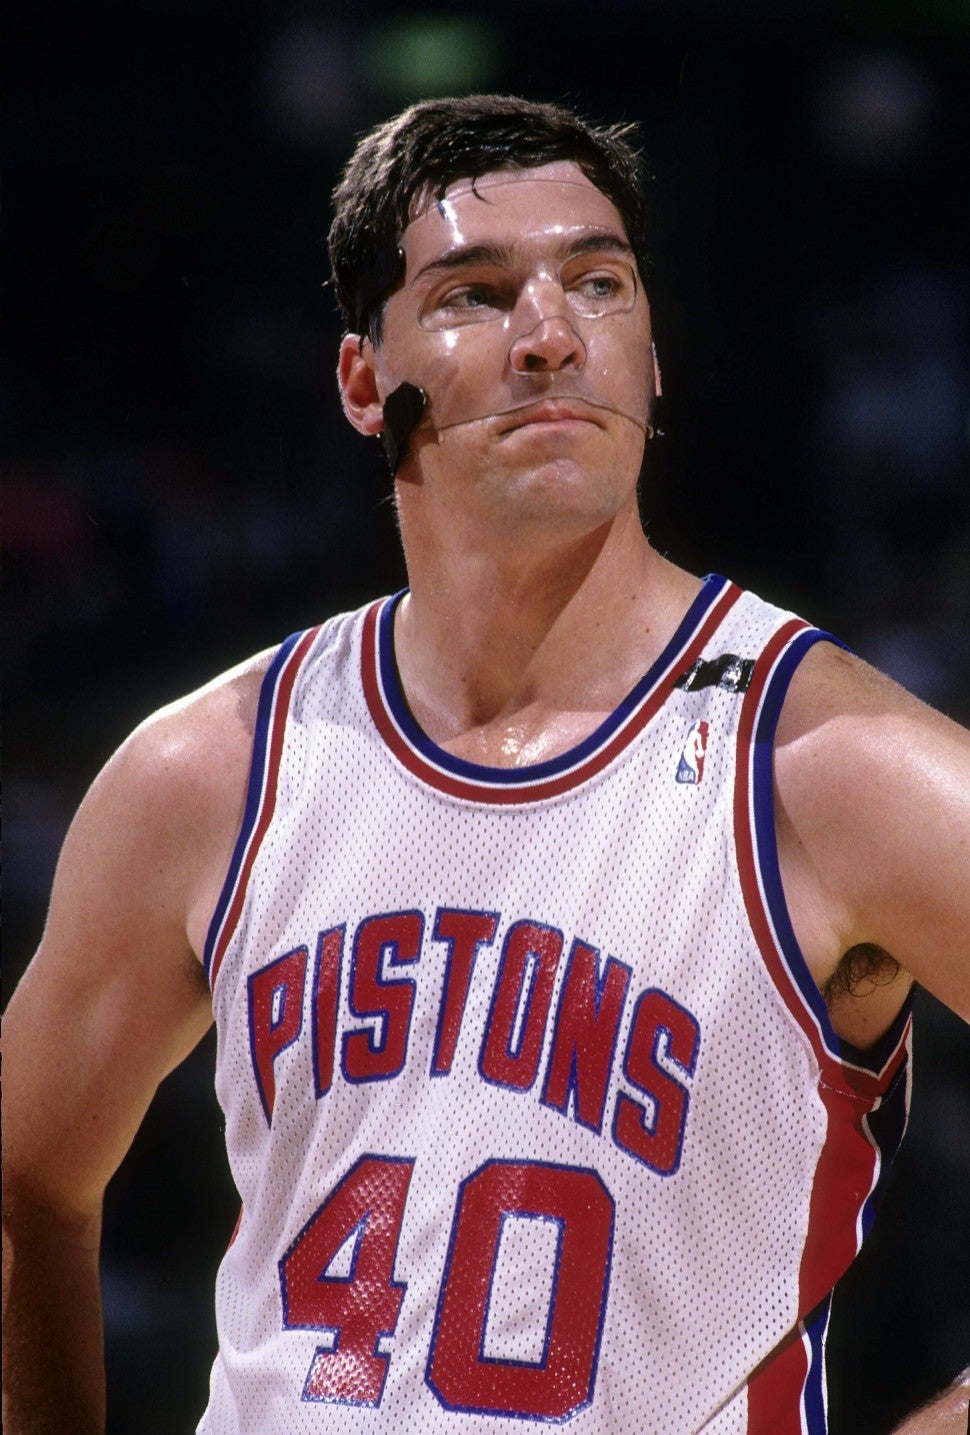 Bill Laimbeer #40 of the Detroit Pistons stand on the court during a early circa 1990's NBA basketball game at the the Palace of Auburn Hills in Detroit, Michigan. Laimbeer played for the Pistons from 1981-94.